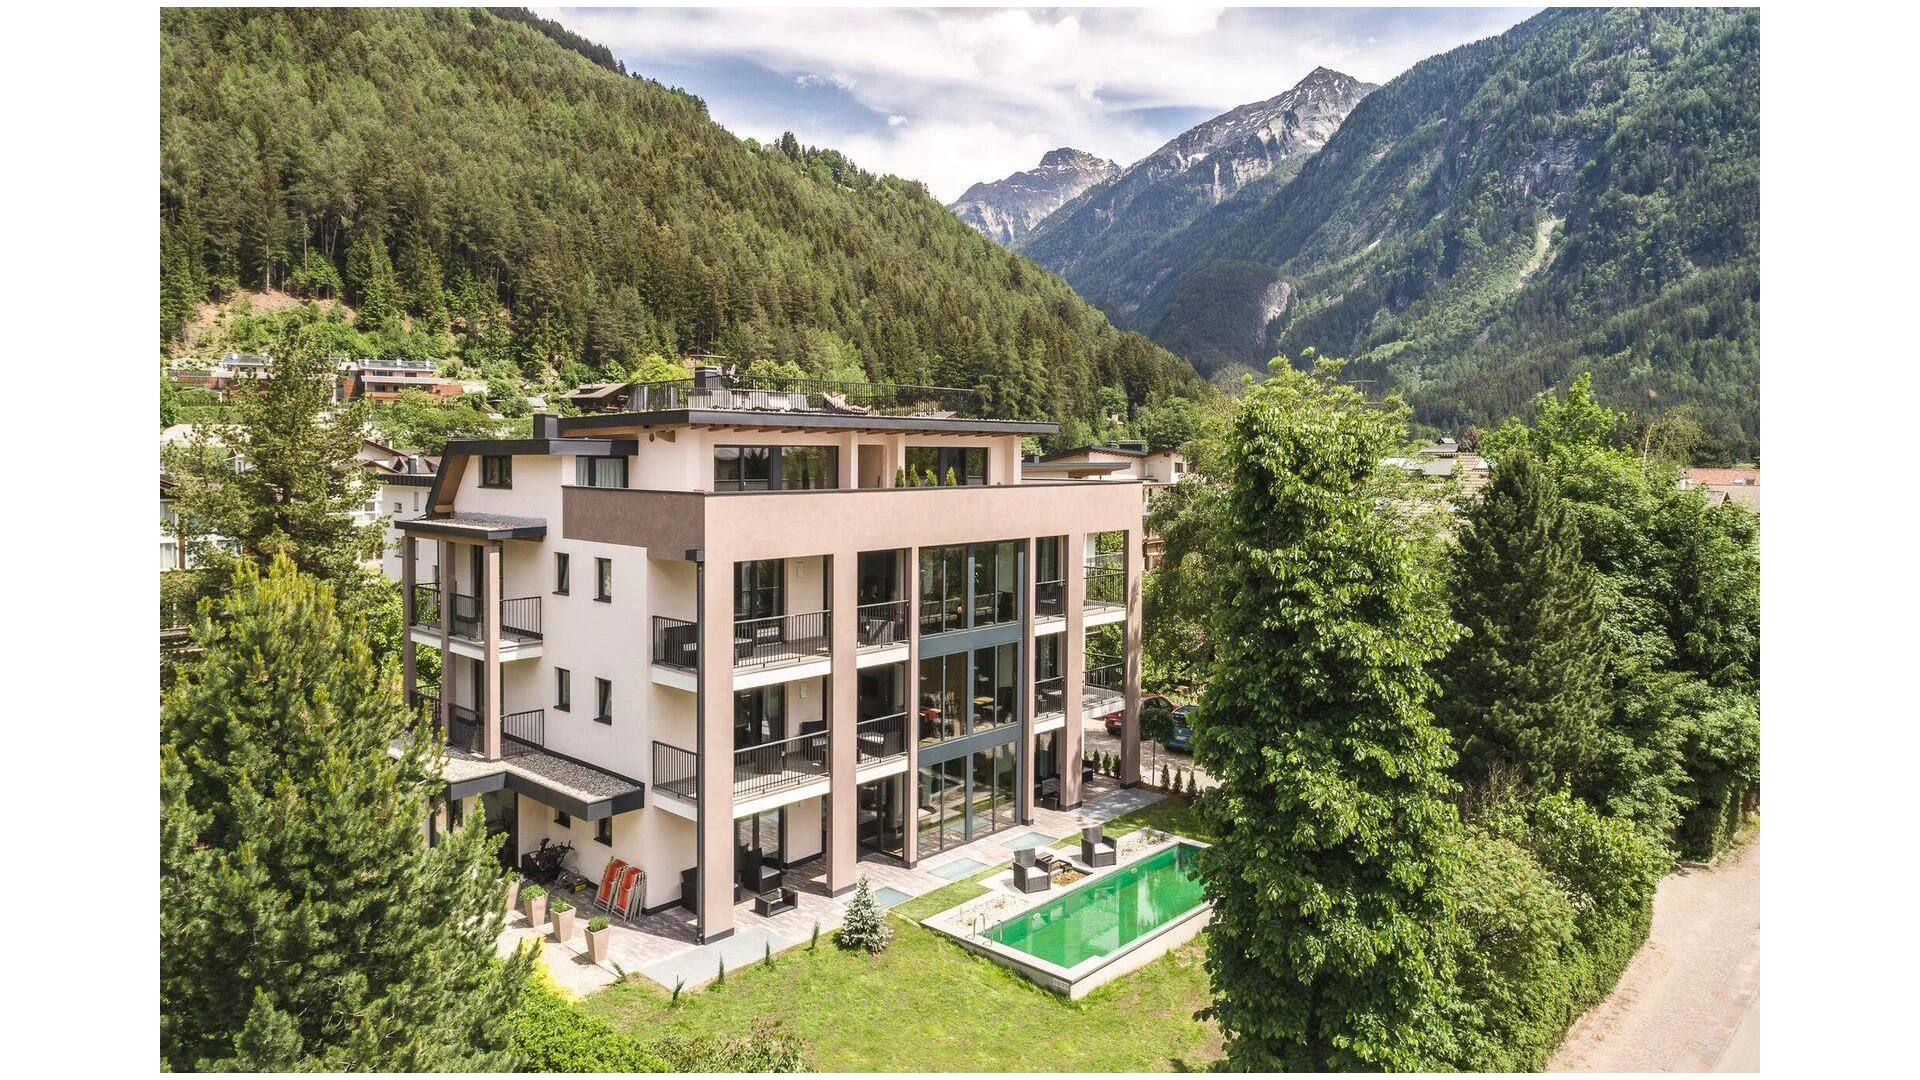 XL Appartements Sand Campo Tures 3 suedtirol.info